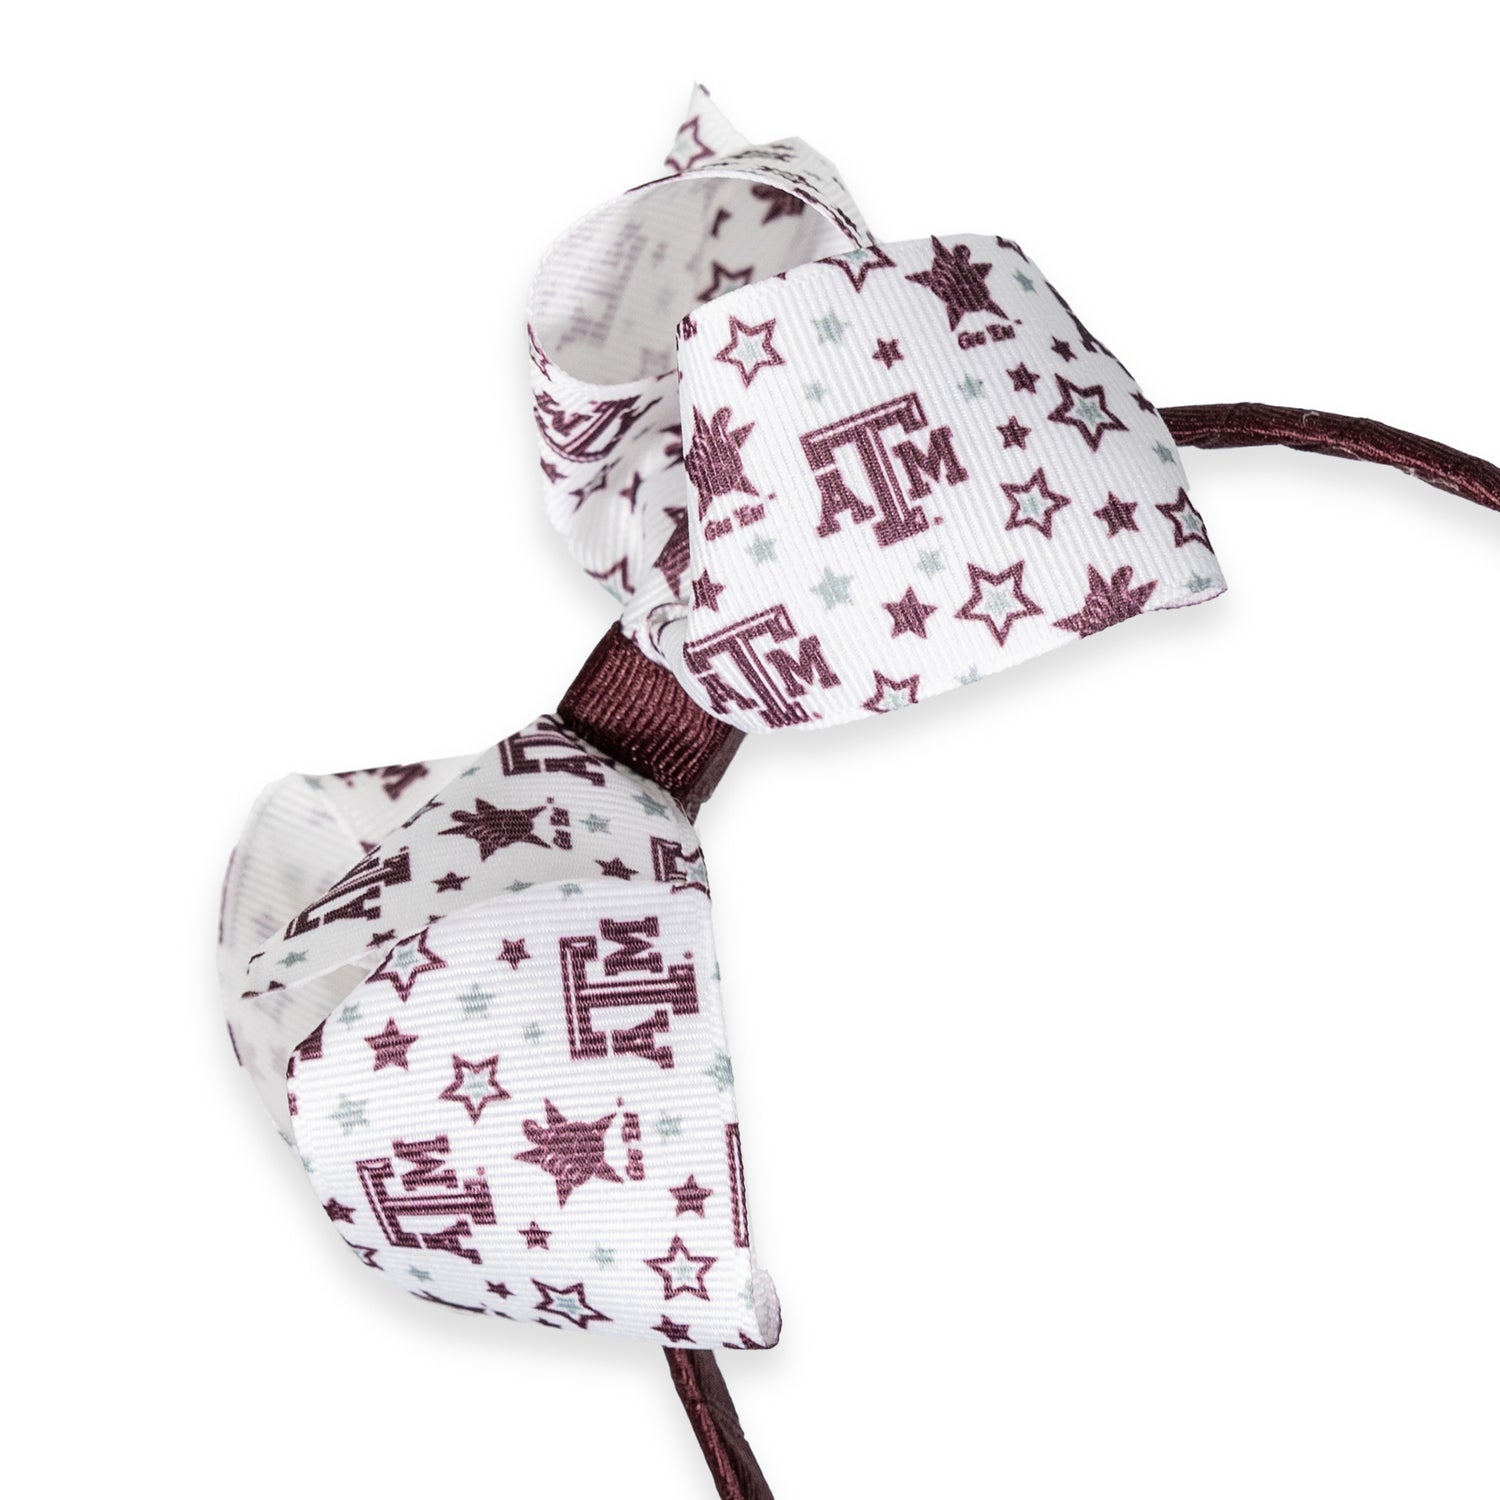 Texas A&M Maroon And White Beveled Atm And Star Print Bow Headband